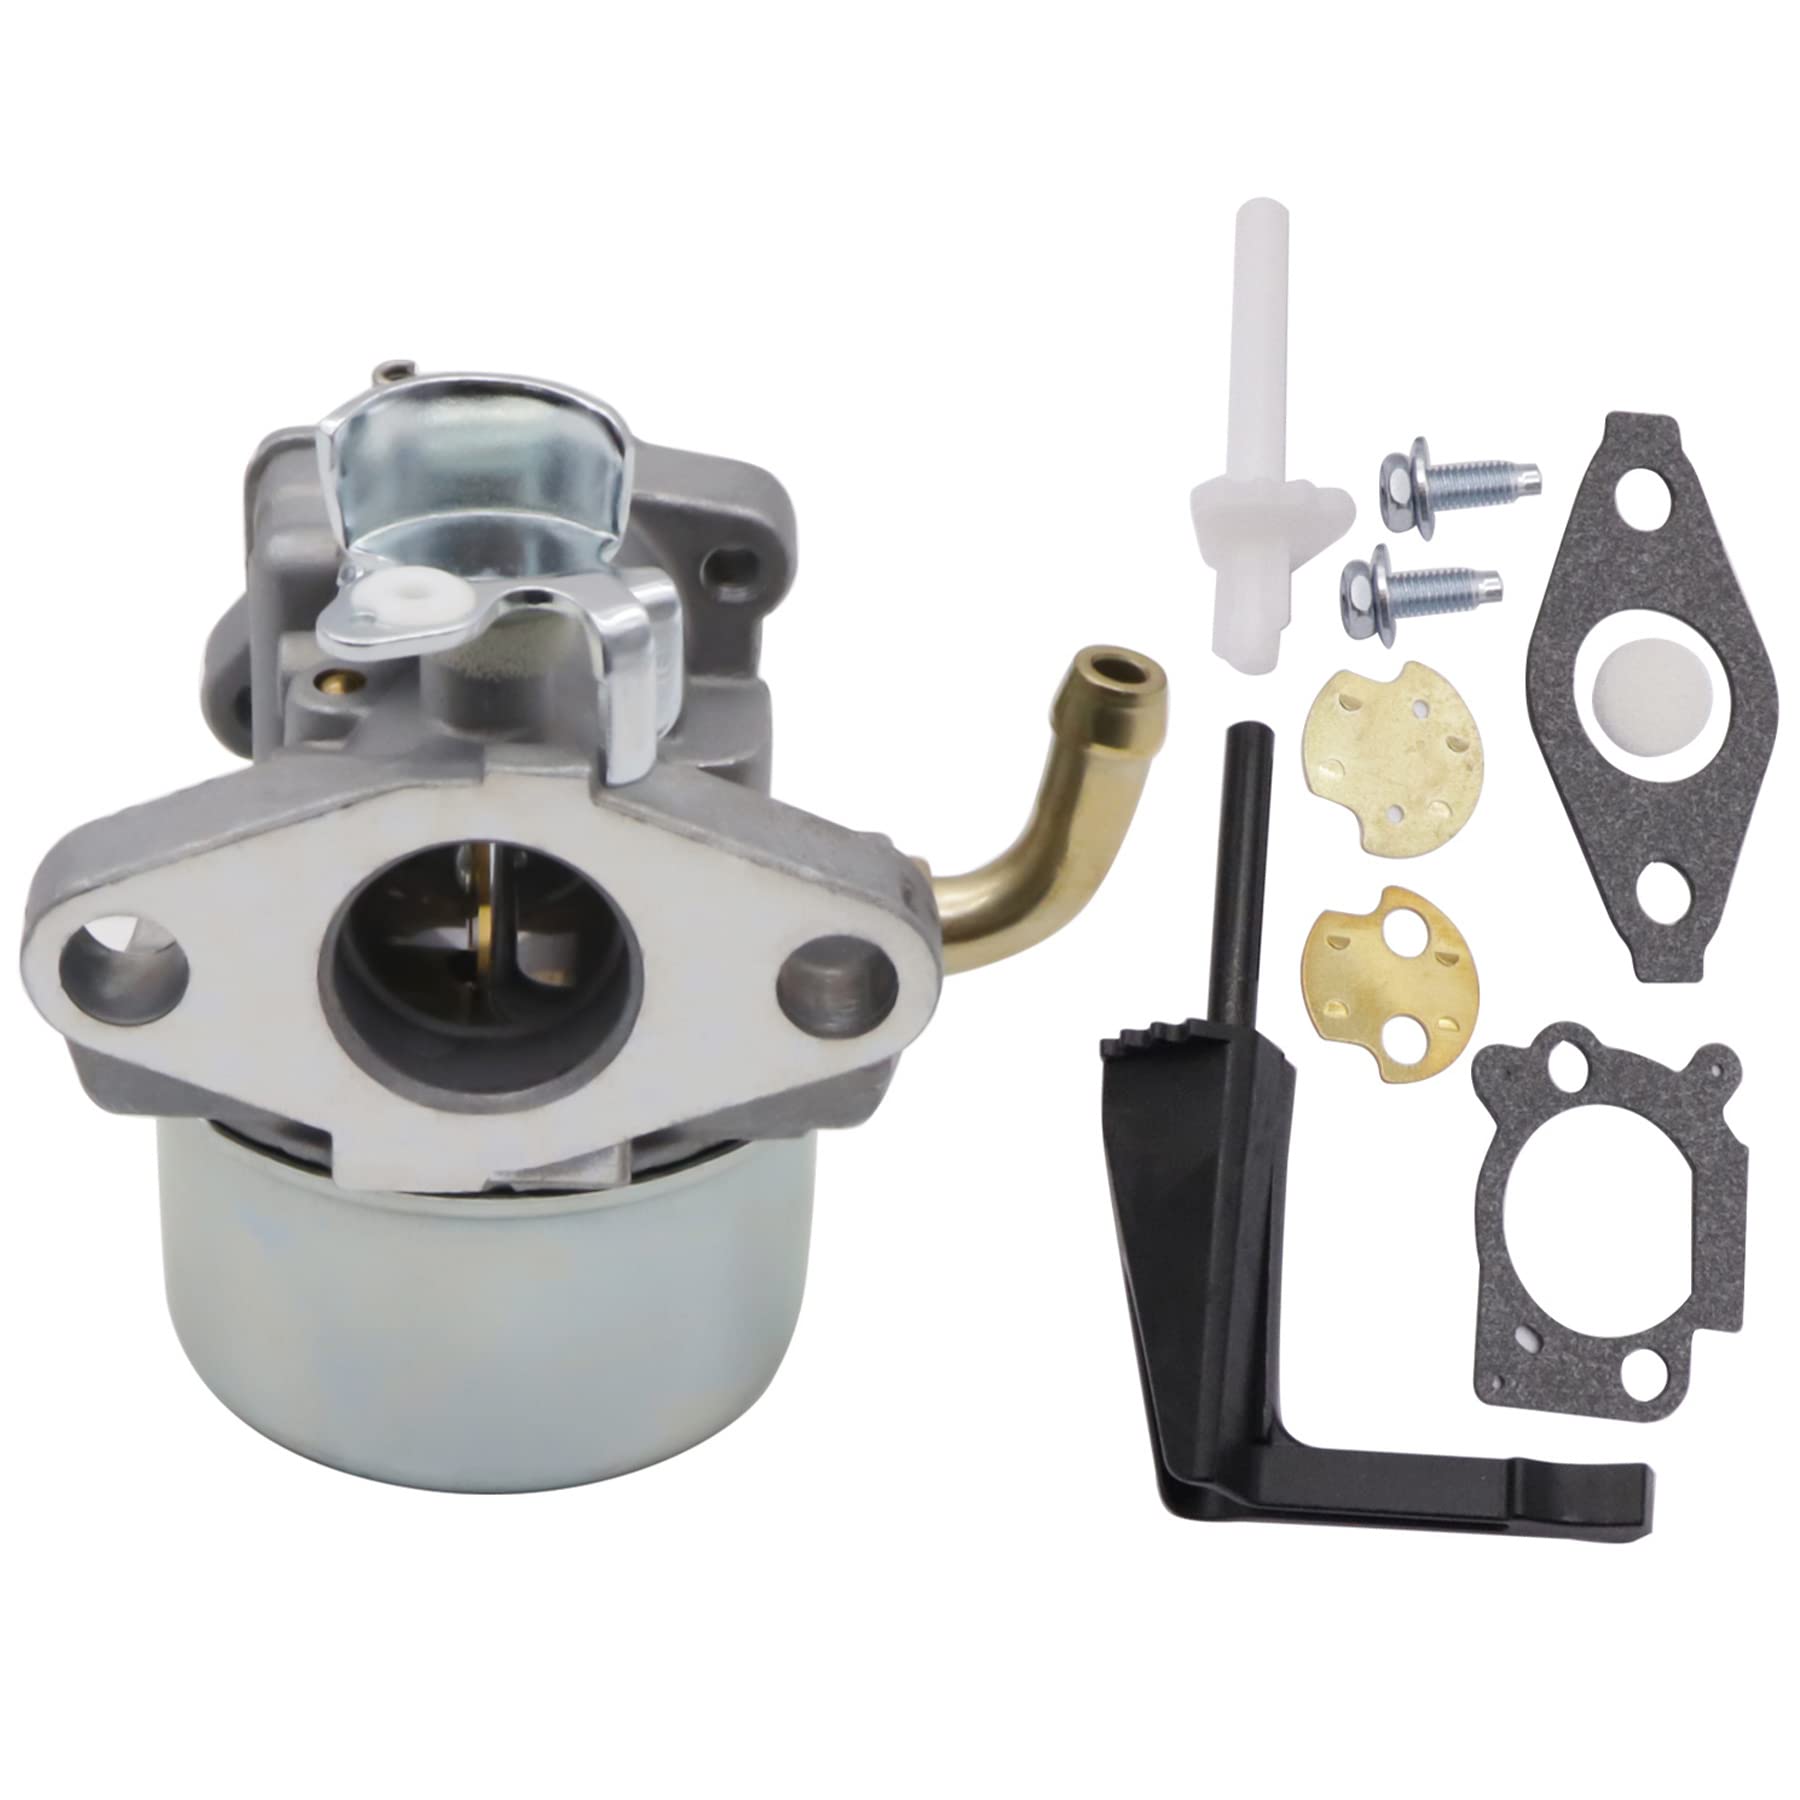 XQSMWF Carburetor Carb Compatible with Craftsman 536881550 536.881550 6.0HP 24" Snow Thrower Snow Blower